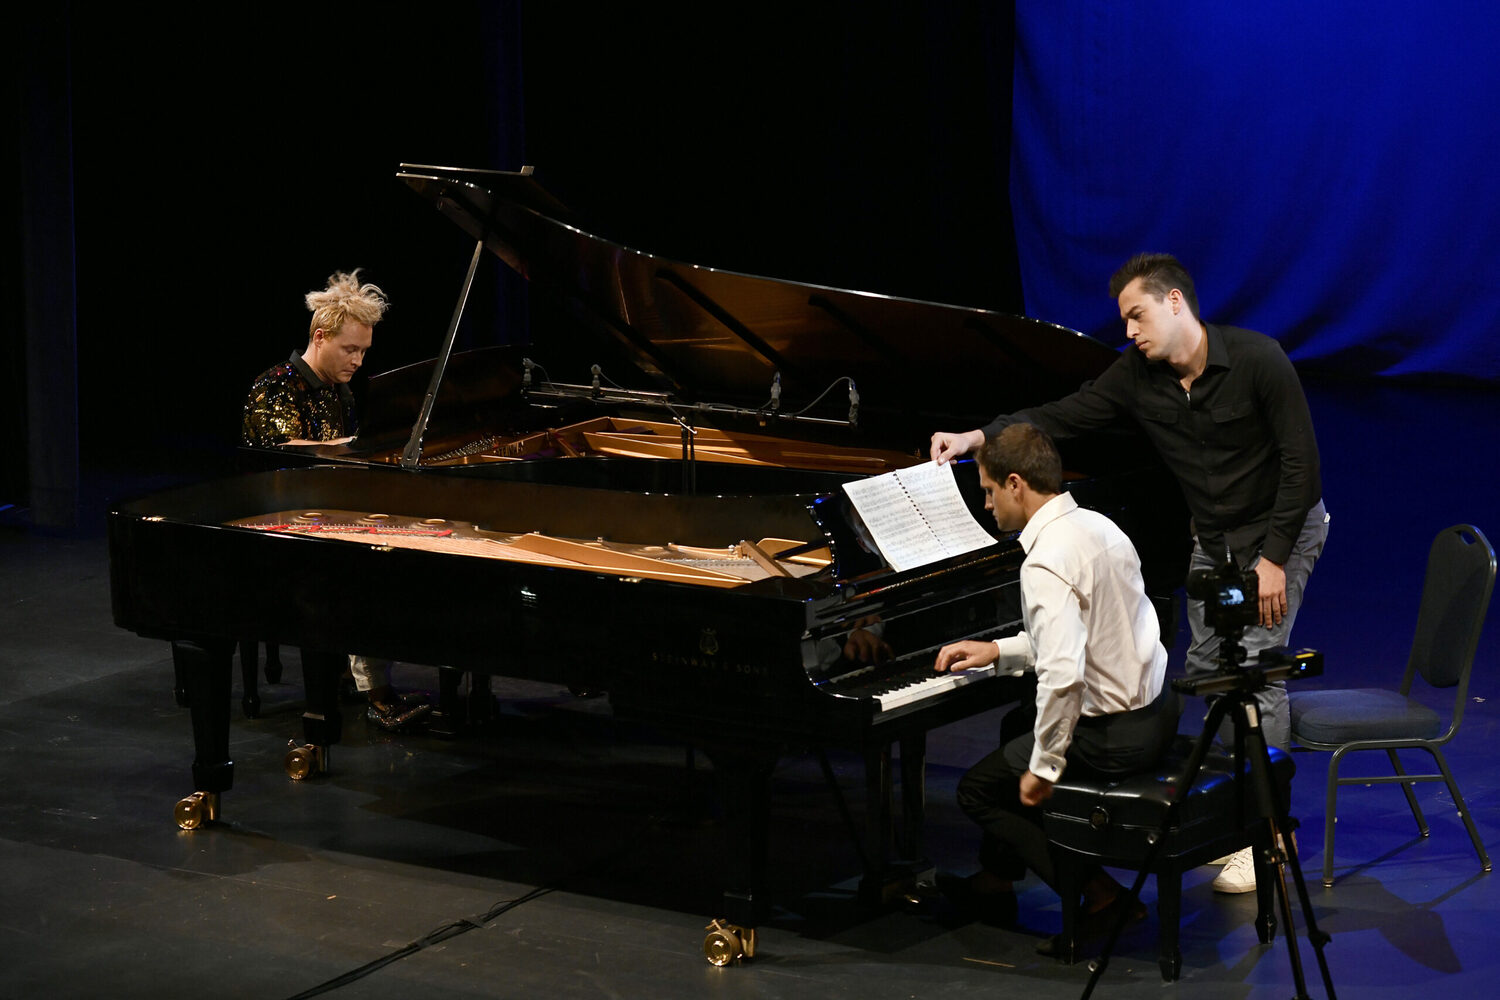 Konstantin Soukhovetski performs with Jacopo Giacopuzzi during a 2021 Pianofest performance in 2021. DANA SHAW